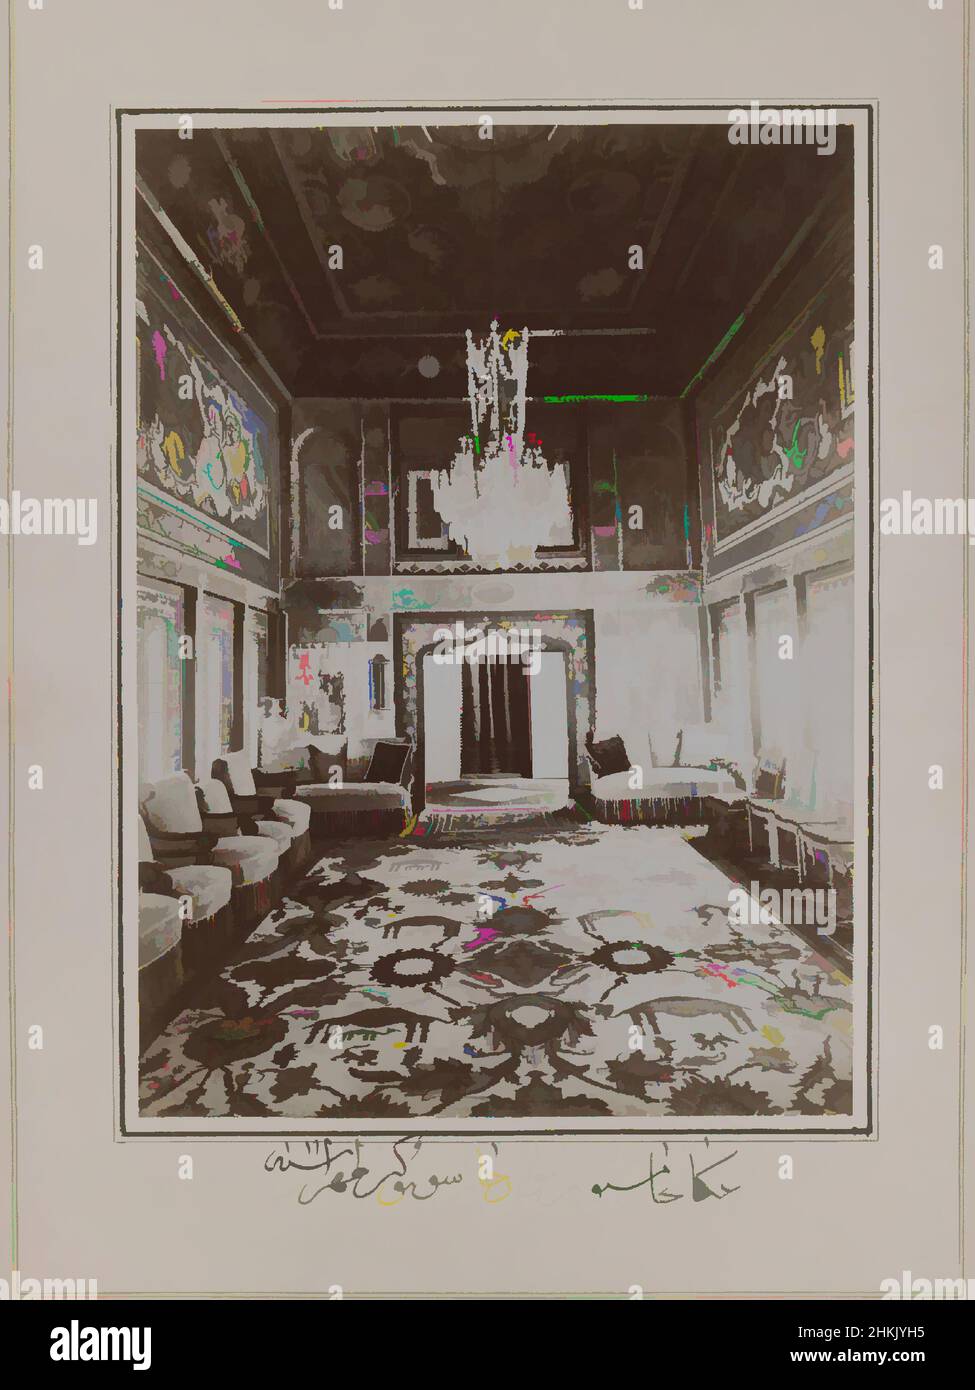 Art inspired by Persian Room in Mooven-el-Dowleh's Old Home, 1900, One of 274 Vintage Photographs, Gelatin silver printing out paper, late 19th-early 20th century, Qajar, Qajar Period, Photo: 9 1/16 x 6 9/16 in., 23.0 x 16.7 cm;, 1900, gelatin print, persia, photograph, Soudavar, Classic works modernized by Artotop with a splash of modernity. Shapes, color and value, eye-catching visual impact on art. Emotions through freedom of artworks in a contemporary way. A timeless message pursuing a wildly creative new direction. Artists turning to the digital medium and creating the Artotop NFT Stock Photo